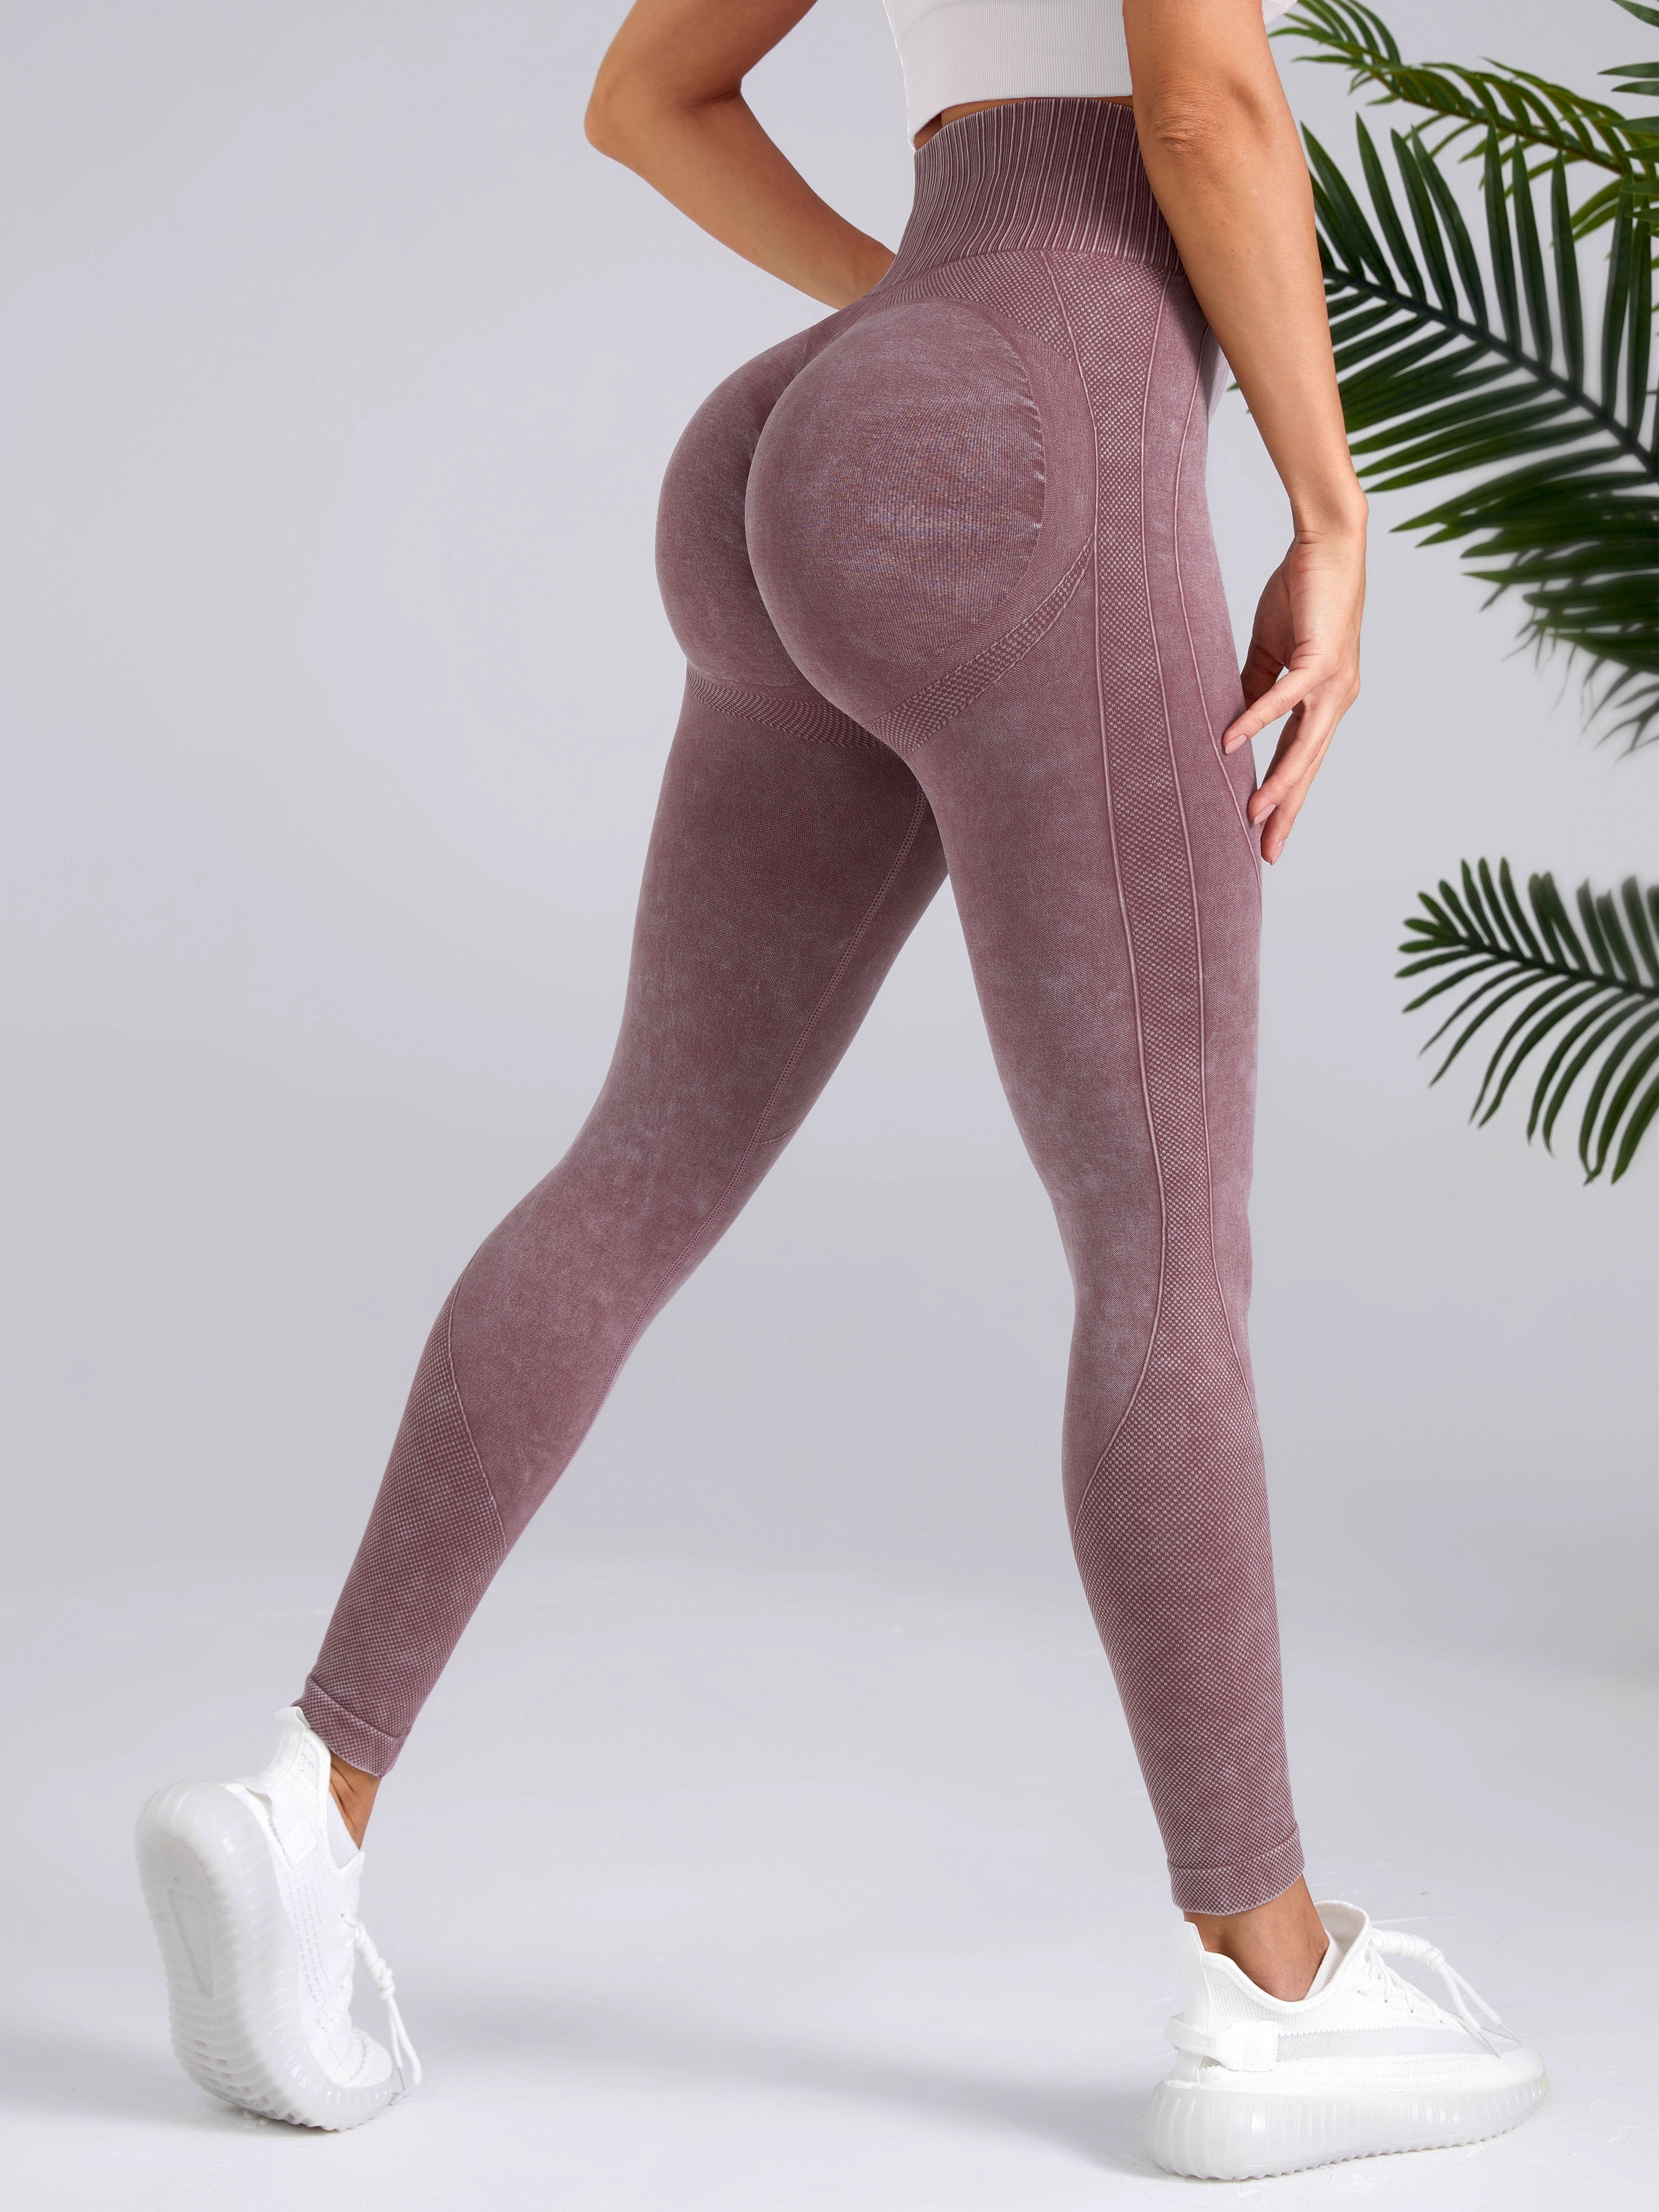 Dark Brown Workout Pants, High Waisted Yoga Leggings, Solid Color Long Women  Yoga Tights